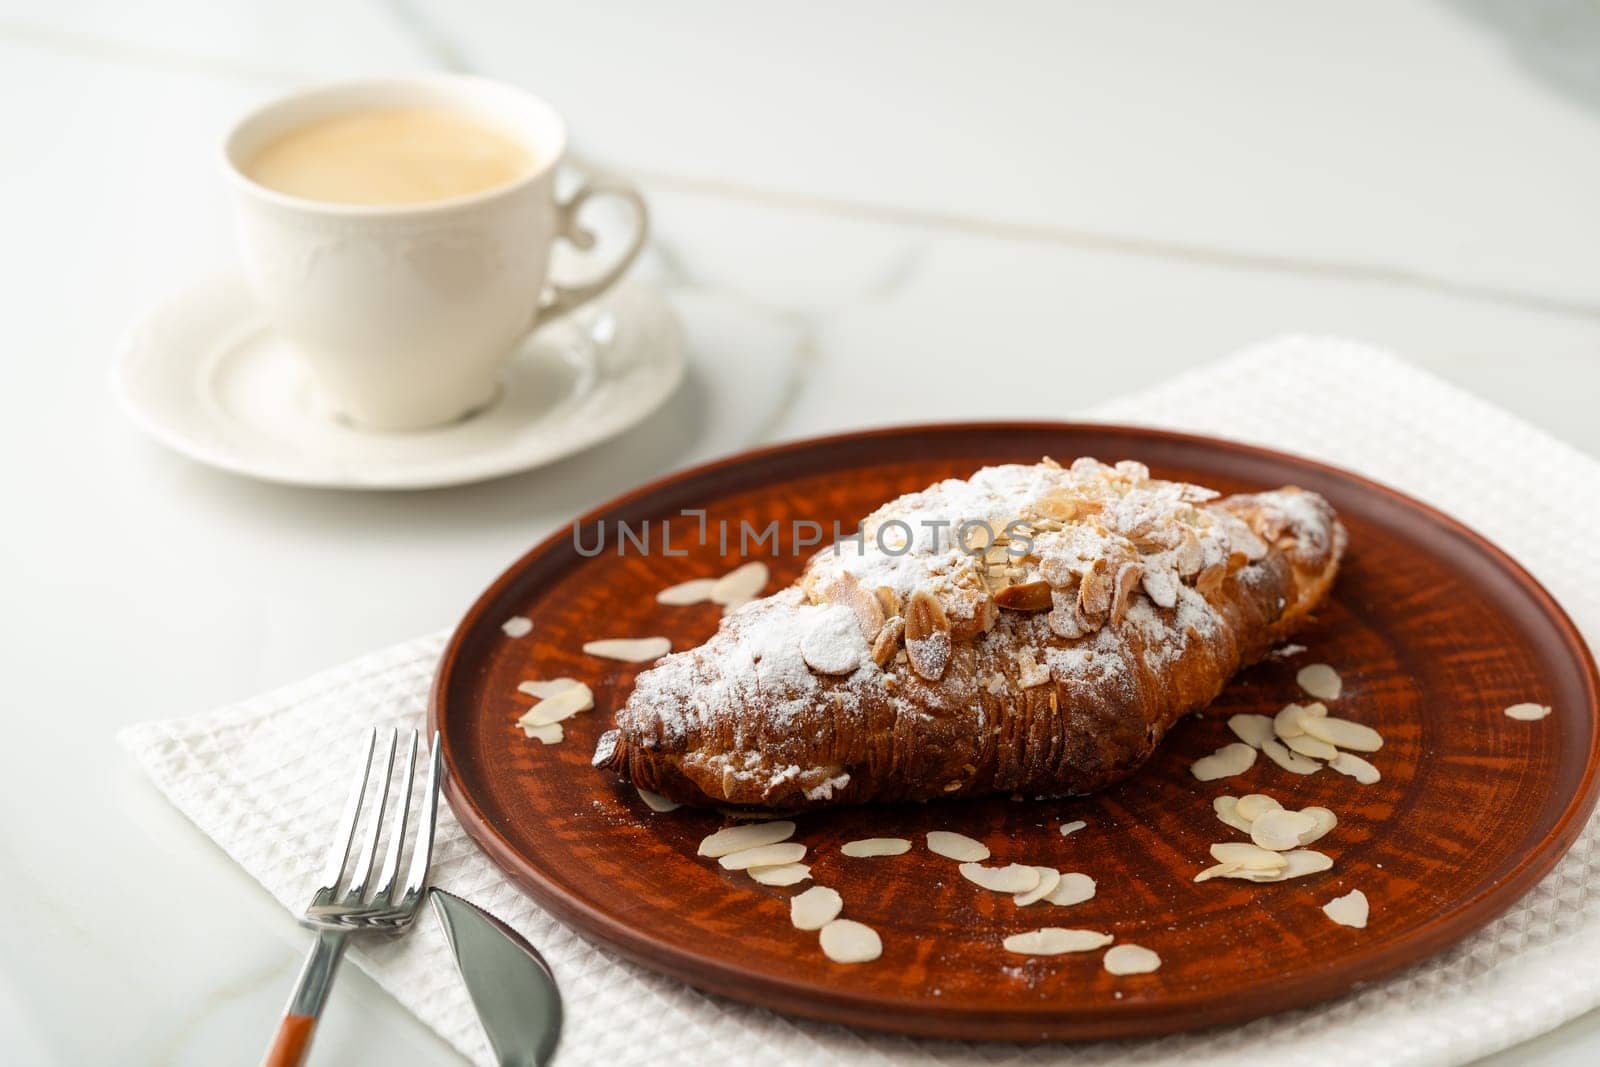 Almond Croissant on clay plate close up by Fabrikasimf